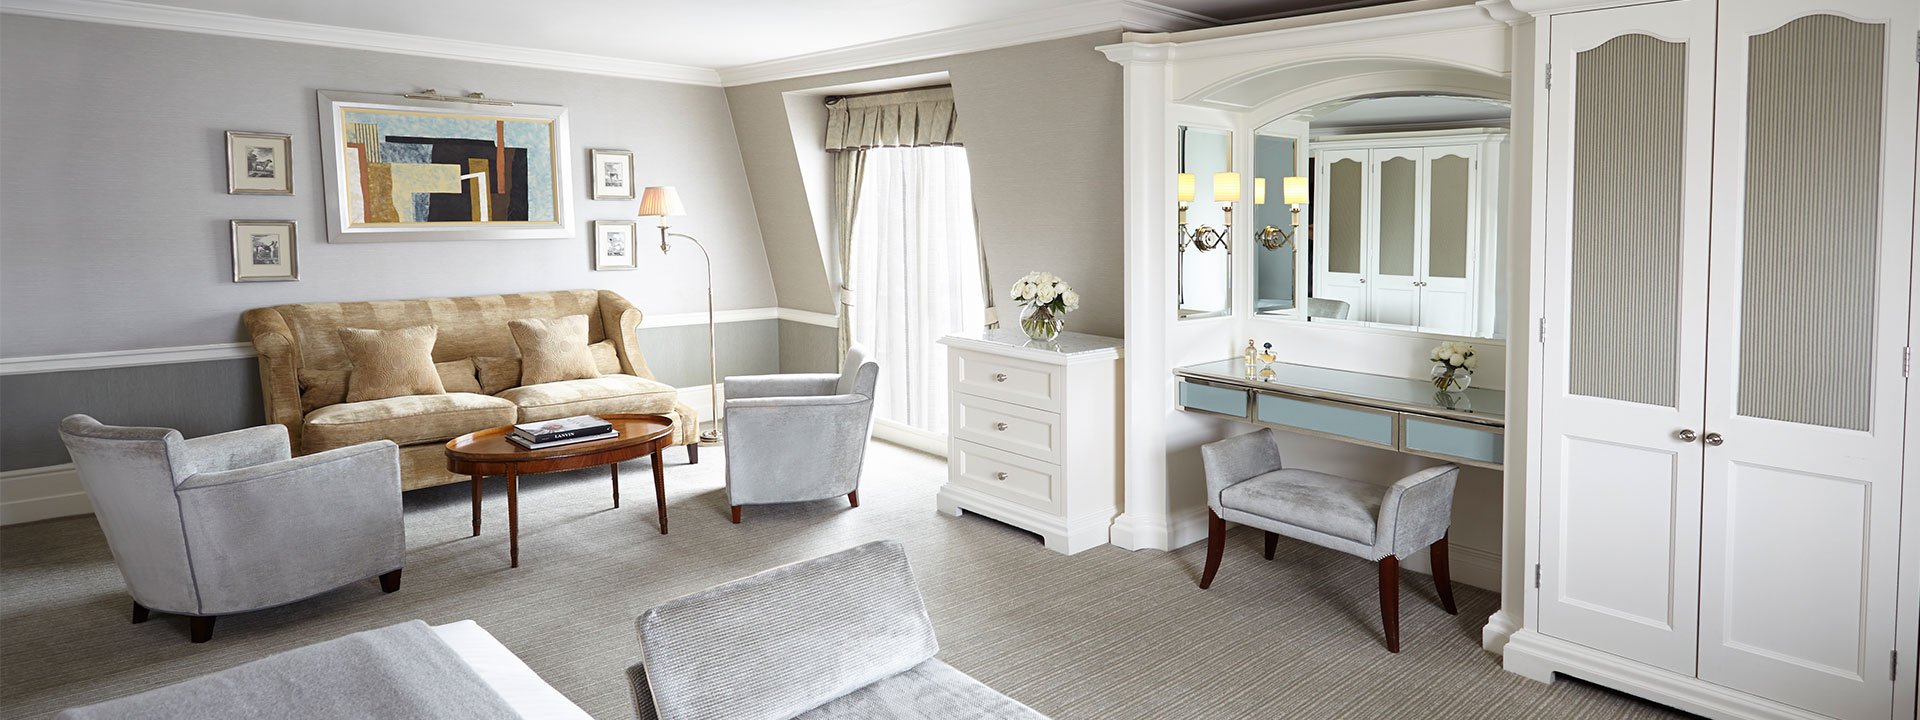 Part of the space from the Deluxe Junior Suite at The Connaught, in a traditional interior style with comfortable furniture.